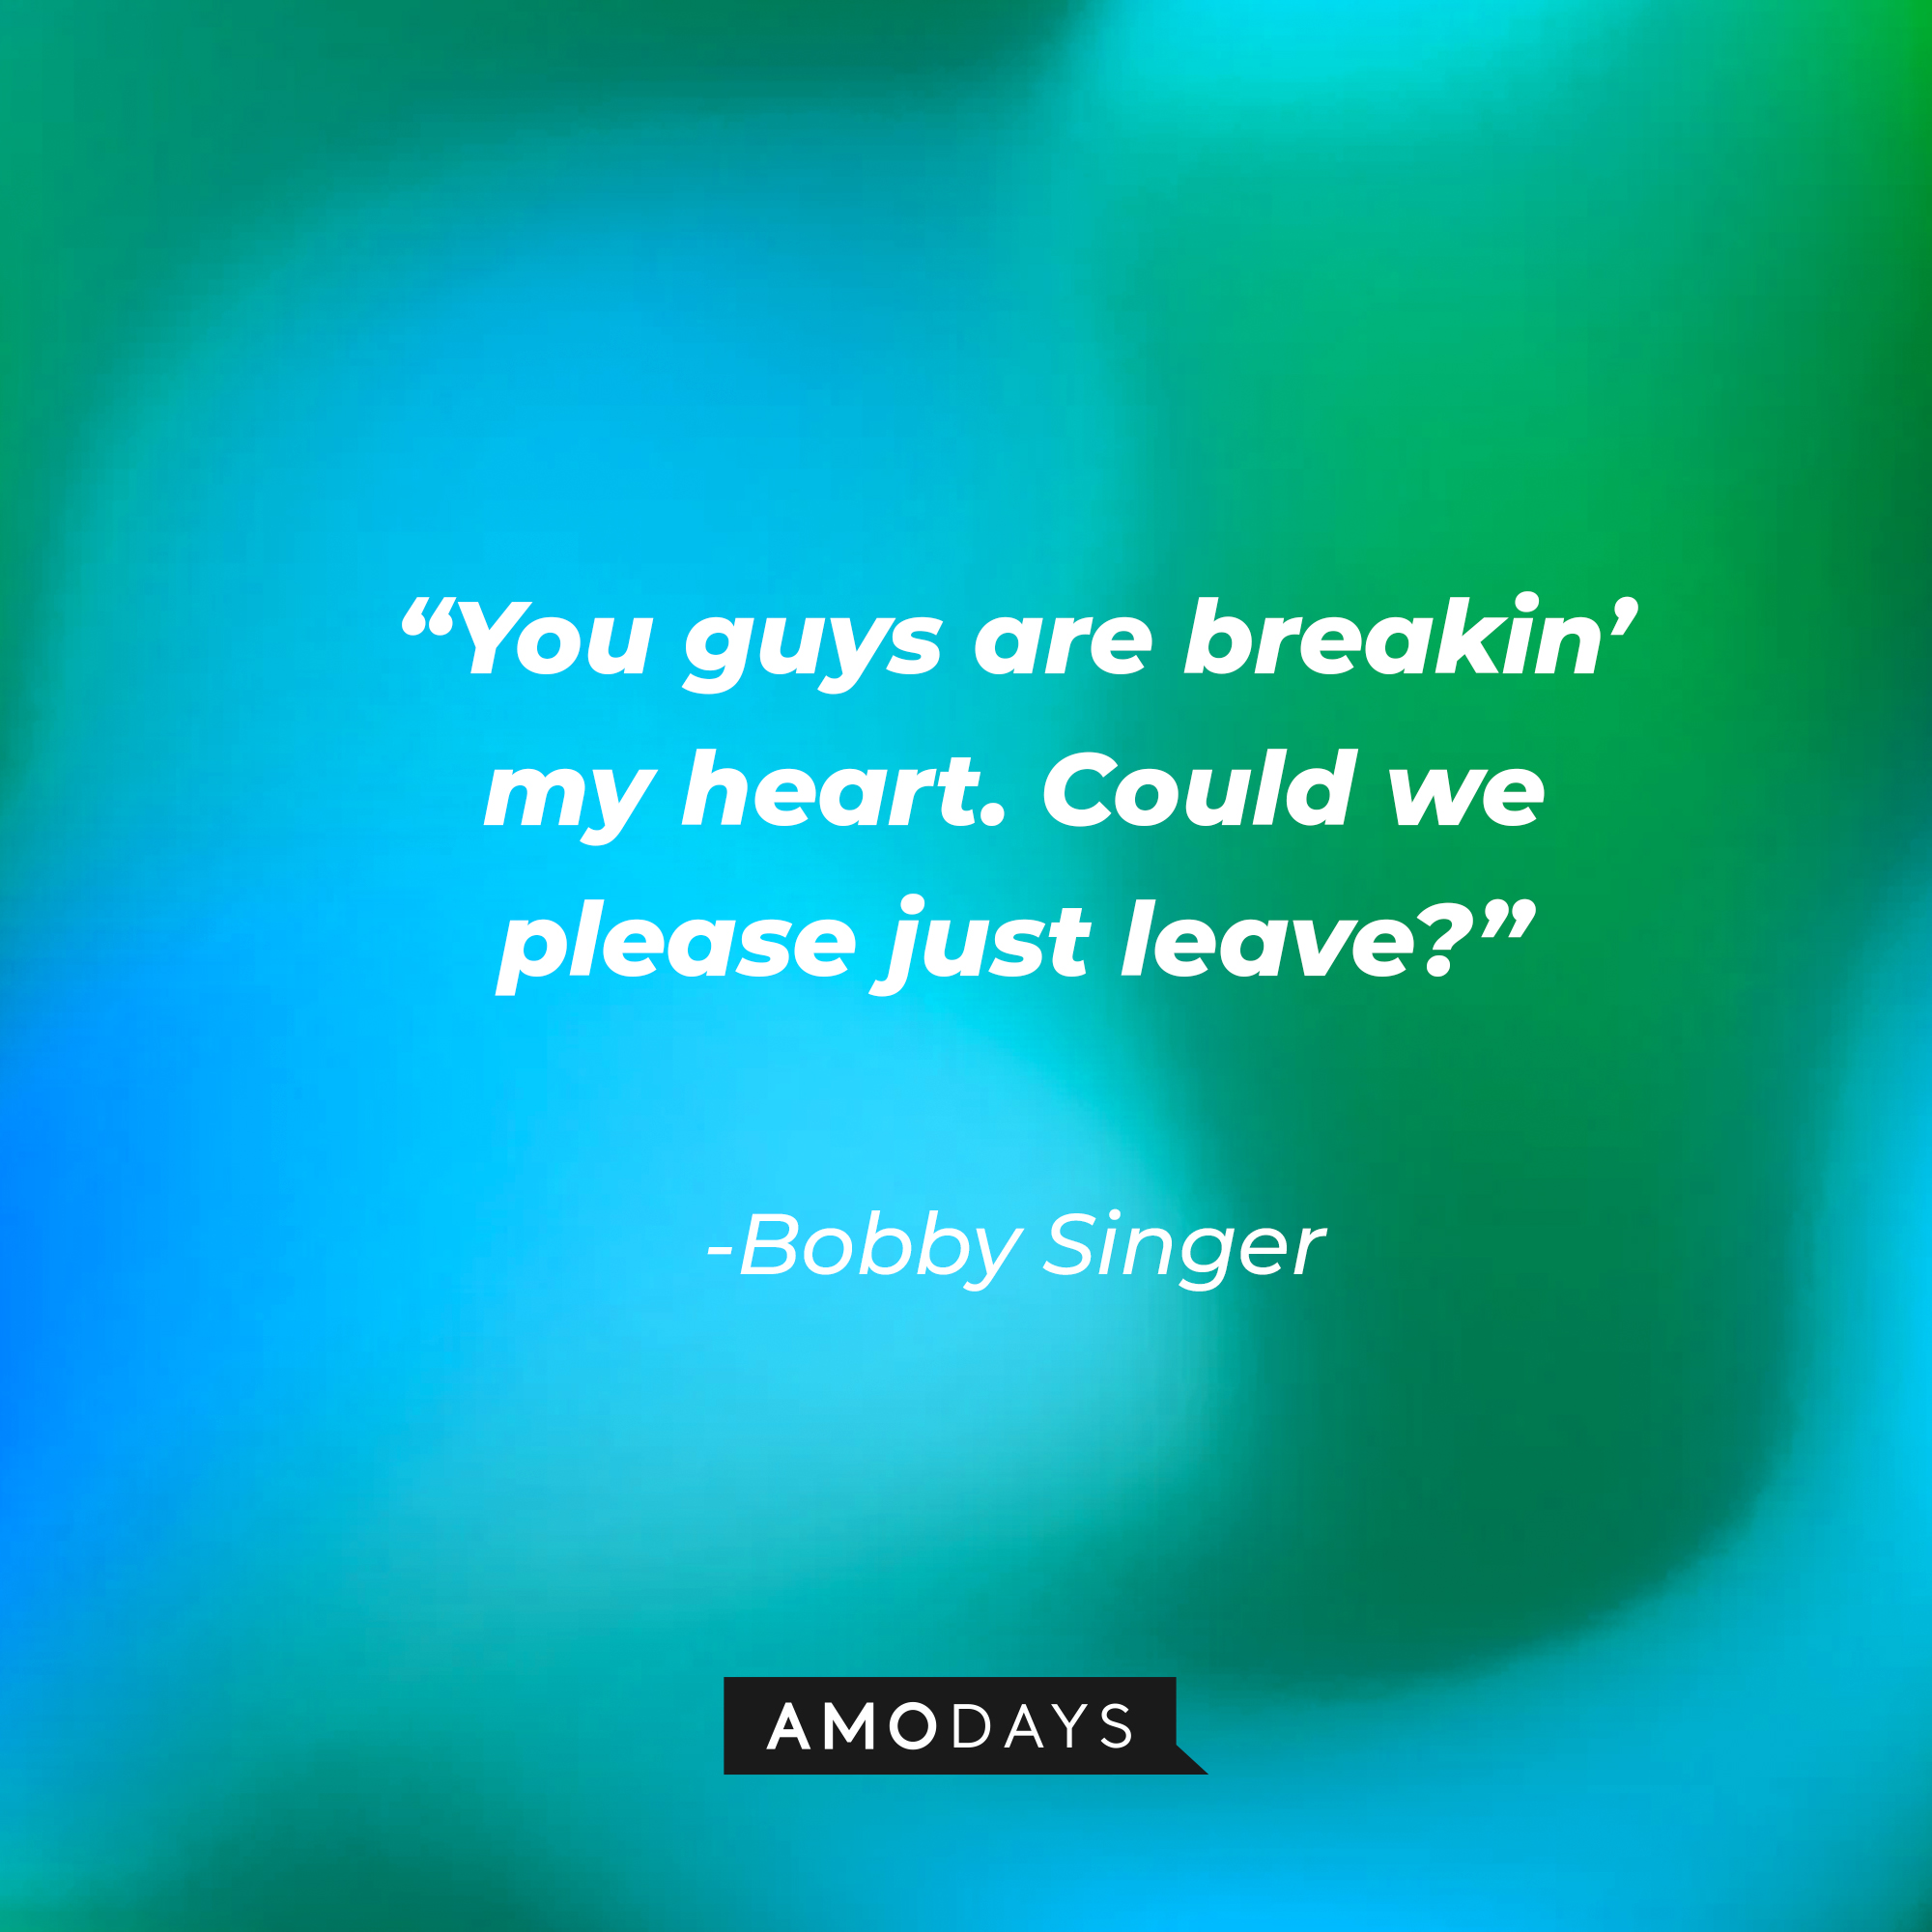 Bobby Singer's quote: "You guys are breakin' my heart. Could we please just leave?" | Source: Amodays